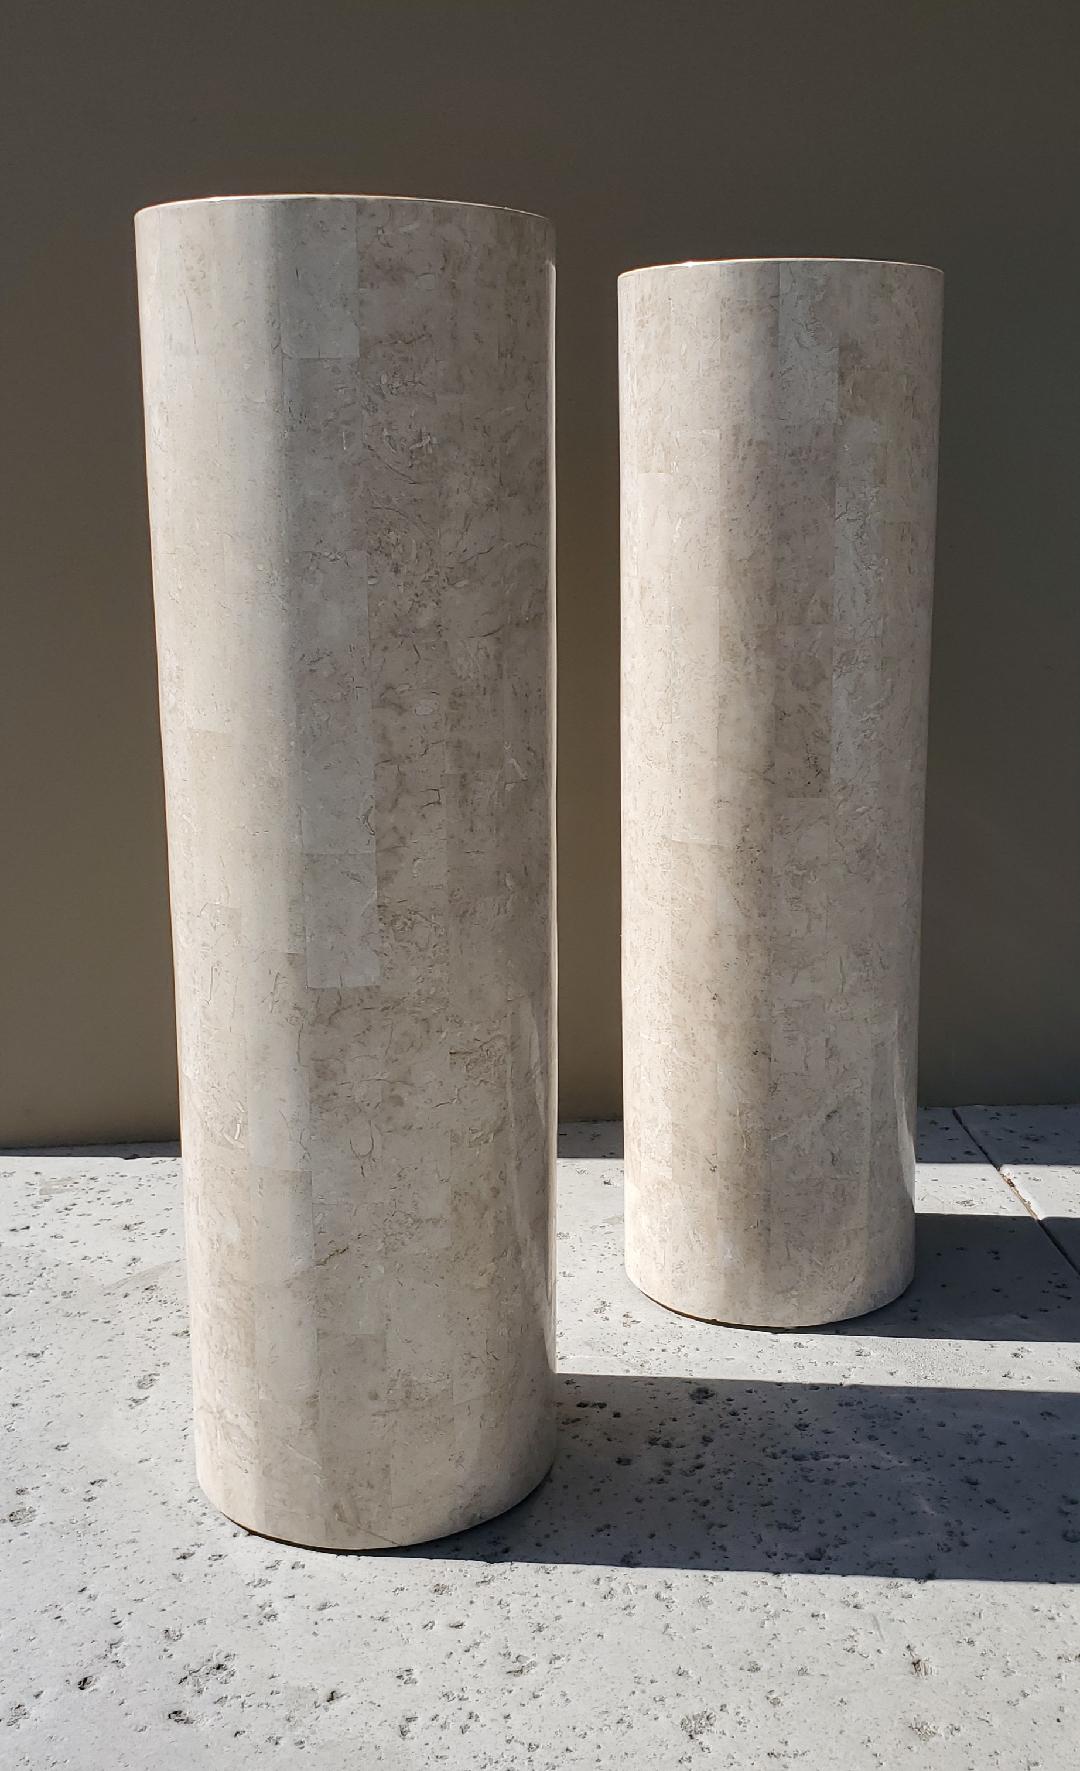 Marquis Collection of Beverly Hills, 1980s Round Tessellated Stone Pedestals 2 13